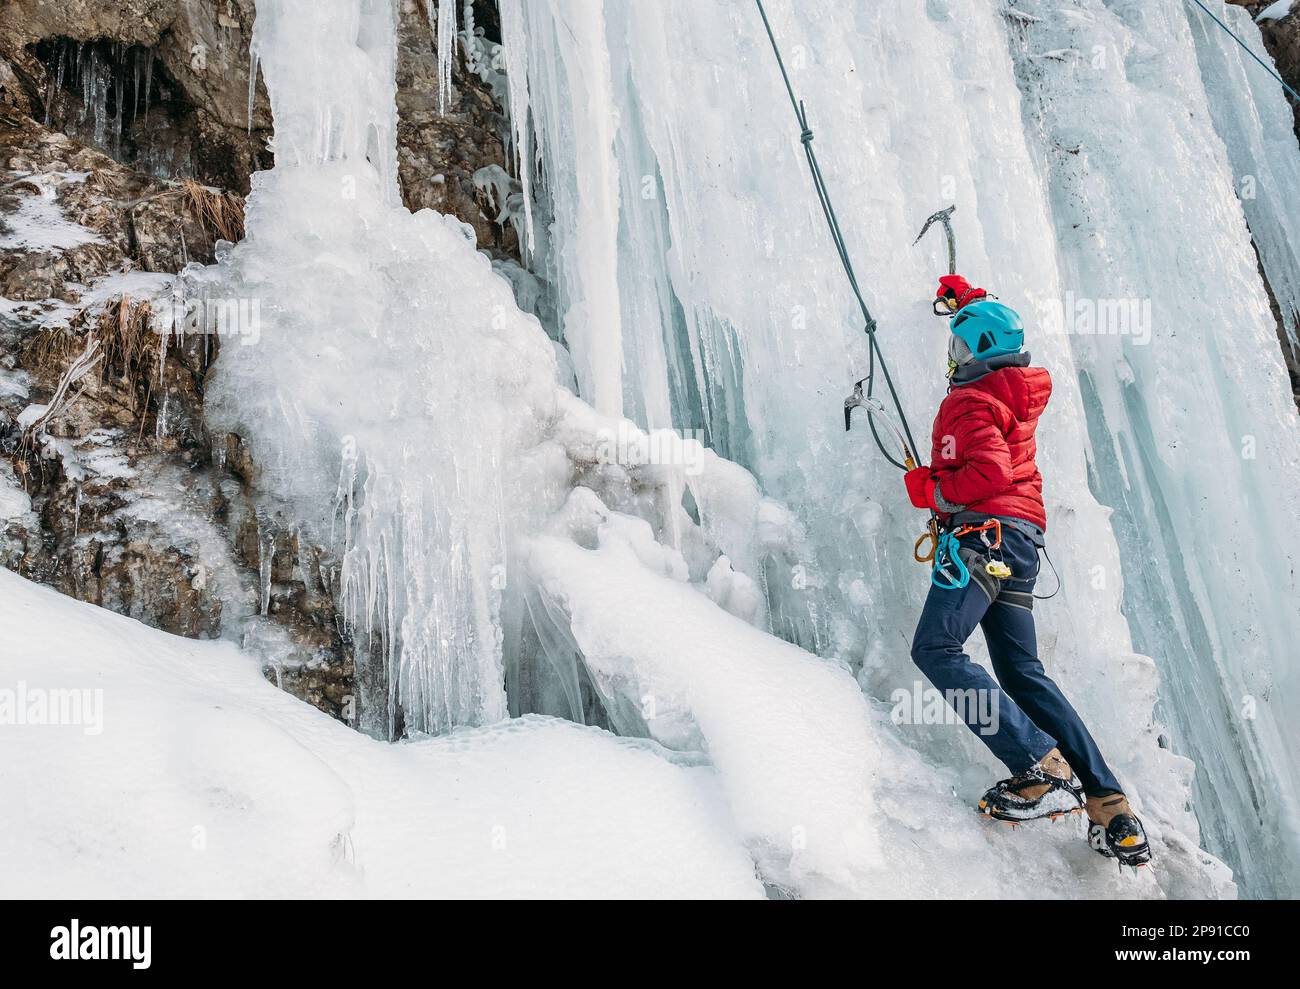 Ice climber dressed in warm winter climbing clothes, safety harness and helmet climbing frozen waterfall using two Ice climbing axes and crampons. Act Stock Photo